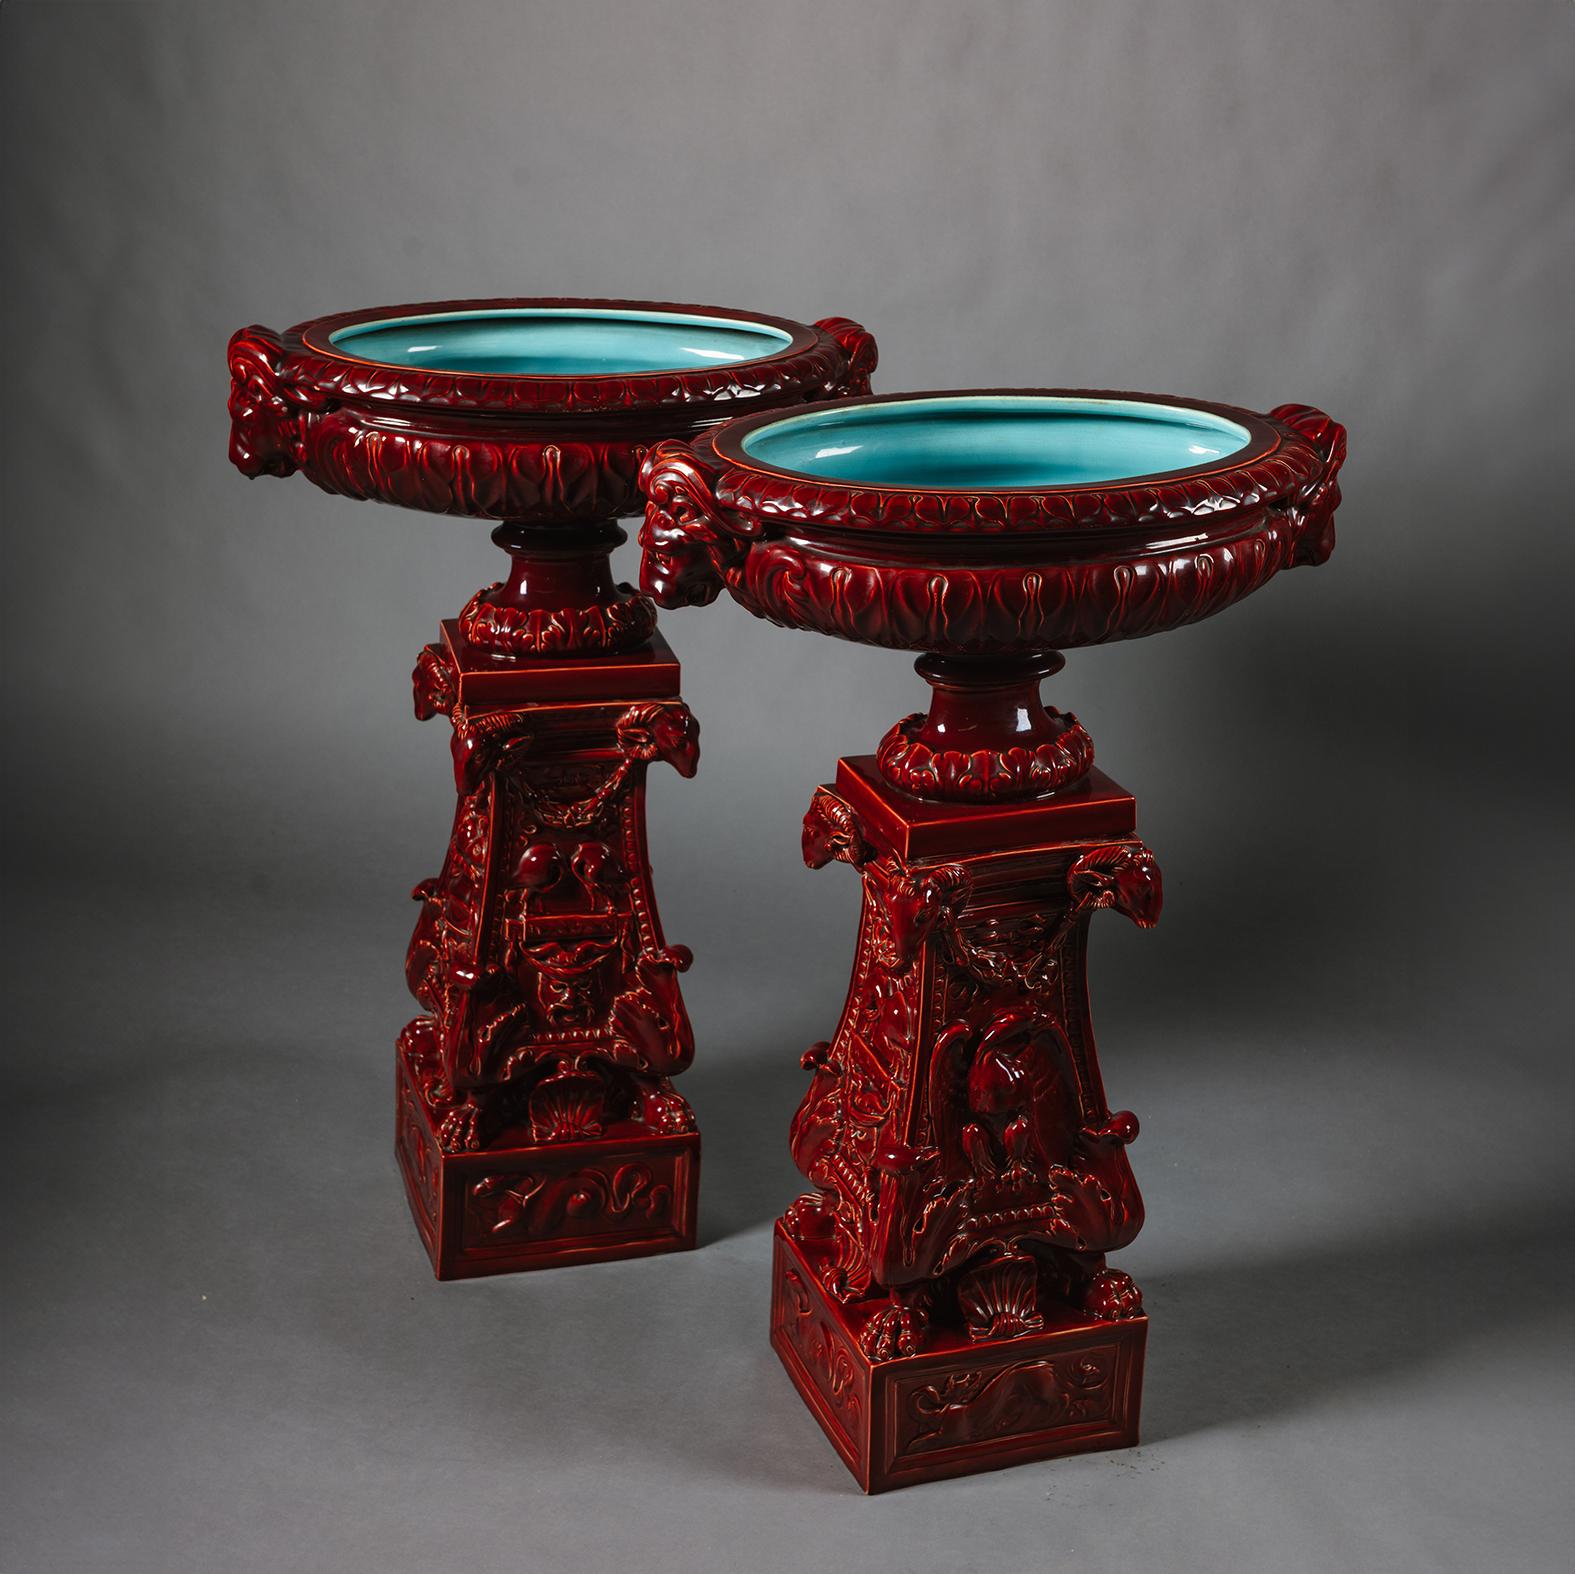 A Pair of Large Sarreguemines Majolica Sang de Boeuf Glazed Earthenware Jardinières On Pedestals.  

Each bowl with moulded leaf decoration, lion head handles and Bleu de Deck interior. On a baluster socle with square foot. The tapering pedestals